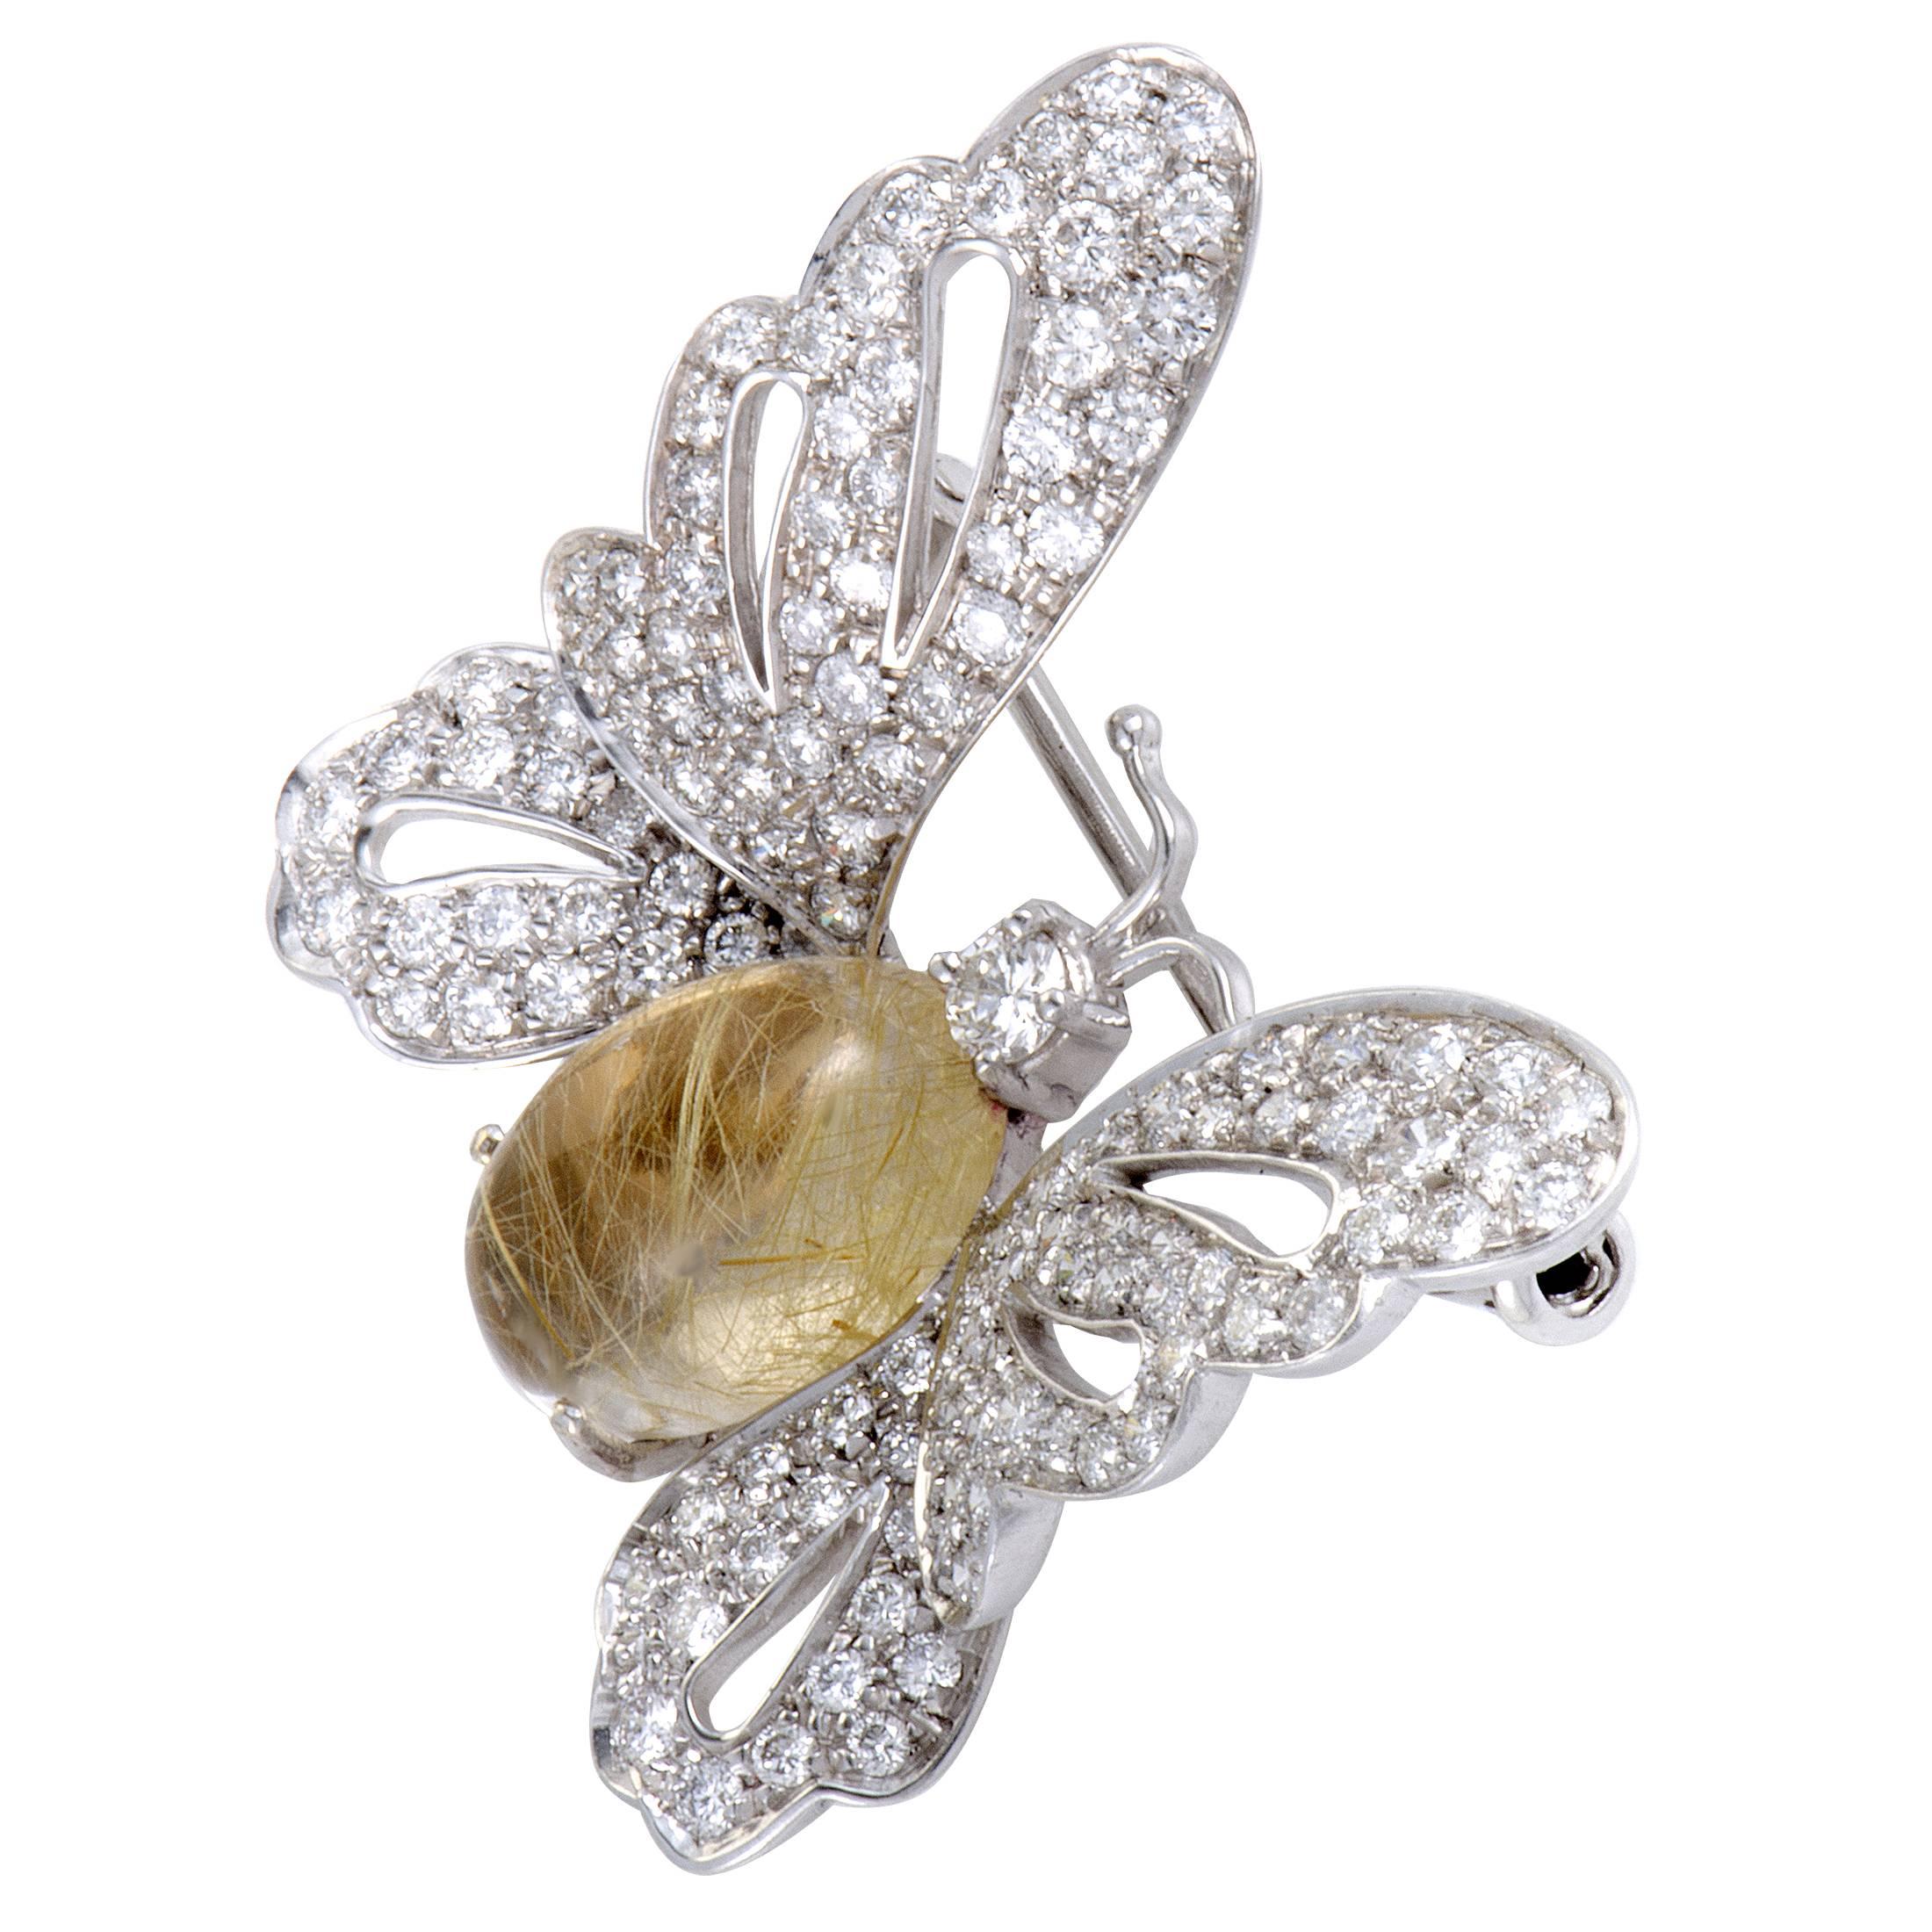 Depicting a graceful butterfly in a magnificently luxurious manner, this outstanding Chantecler brooch boasts attractive fashionable appeal. The brooch is made of 18K white gold and it is paved with 2.23 carats of glistening diamonds, also featuring